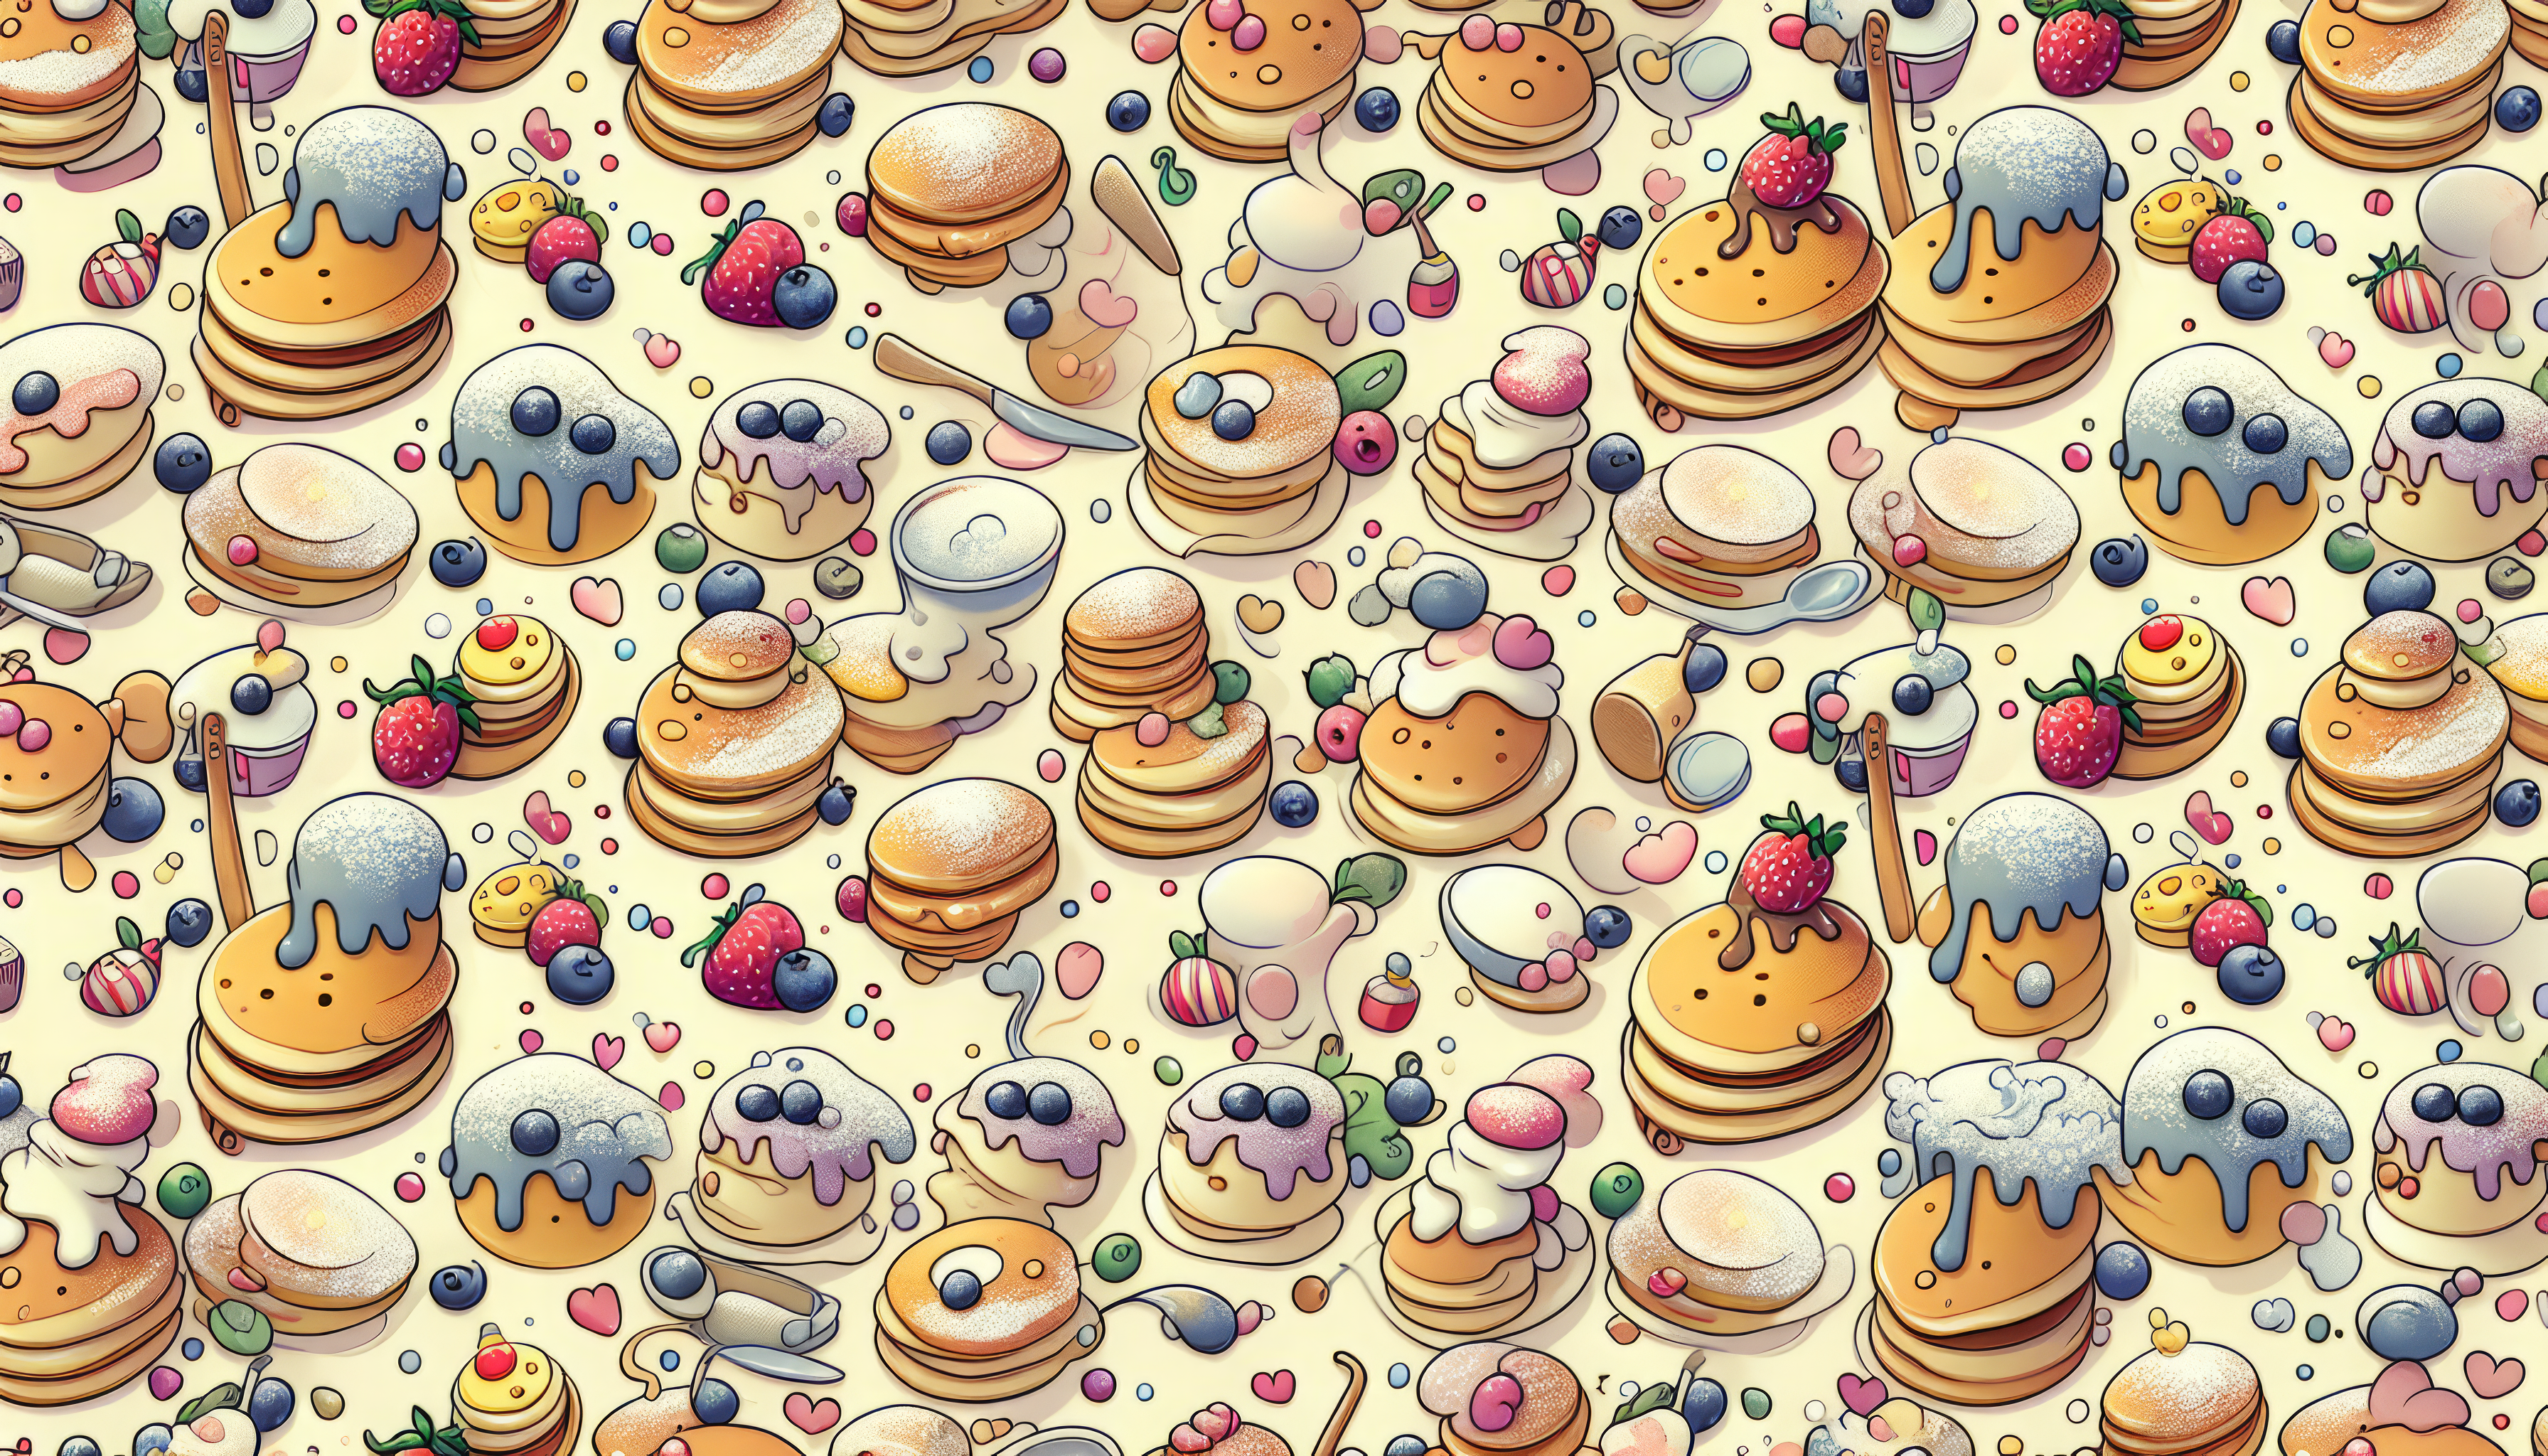 HD wallpaper featuring an assortment of illustrated pancakes with various toppings, ideal for a desktop background tagged with pancakes.